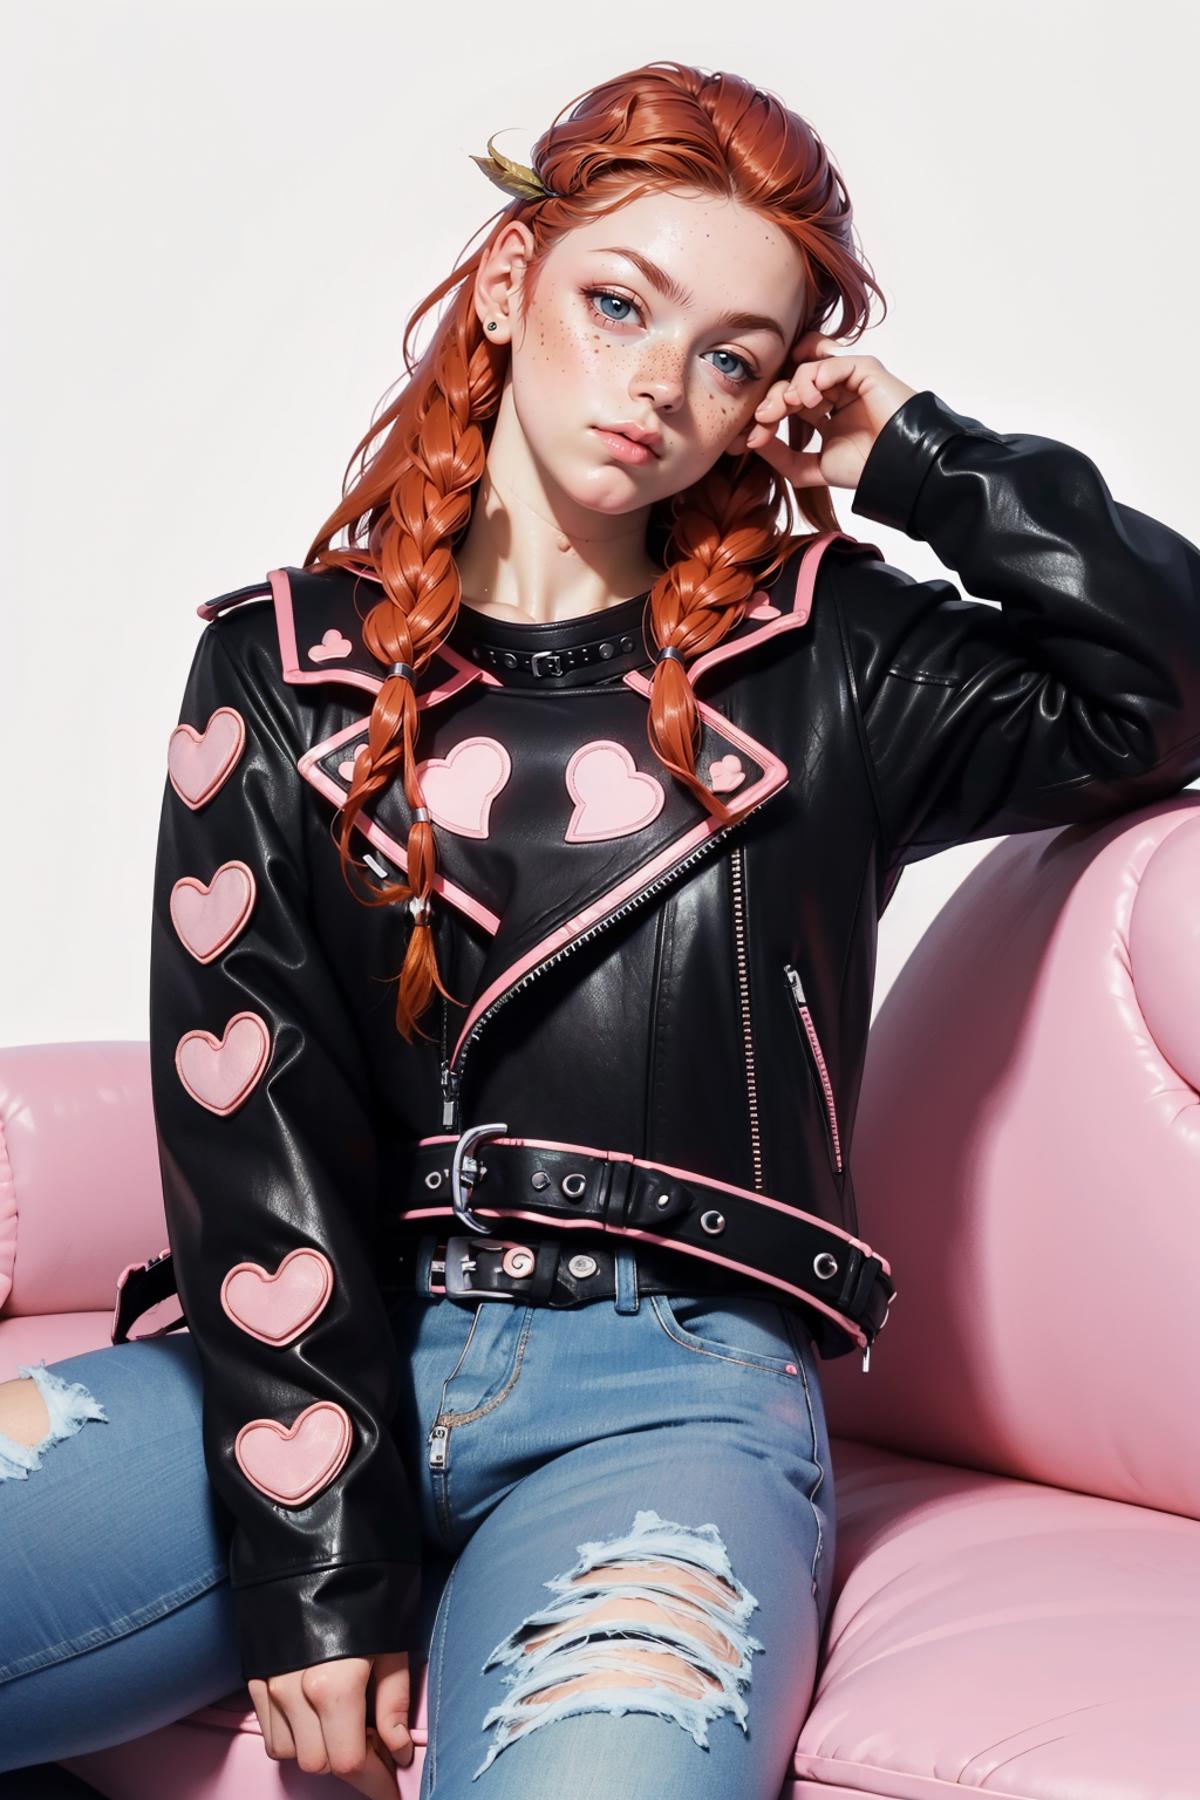 A young girl wearing a black leather jacket with pink hearts on it, sitting on a pink chair.